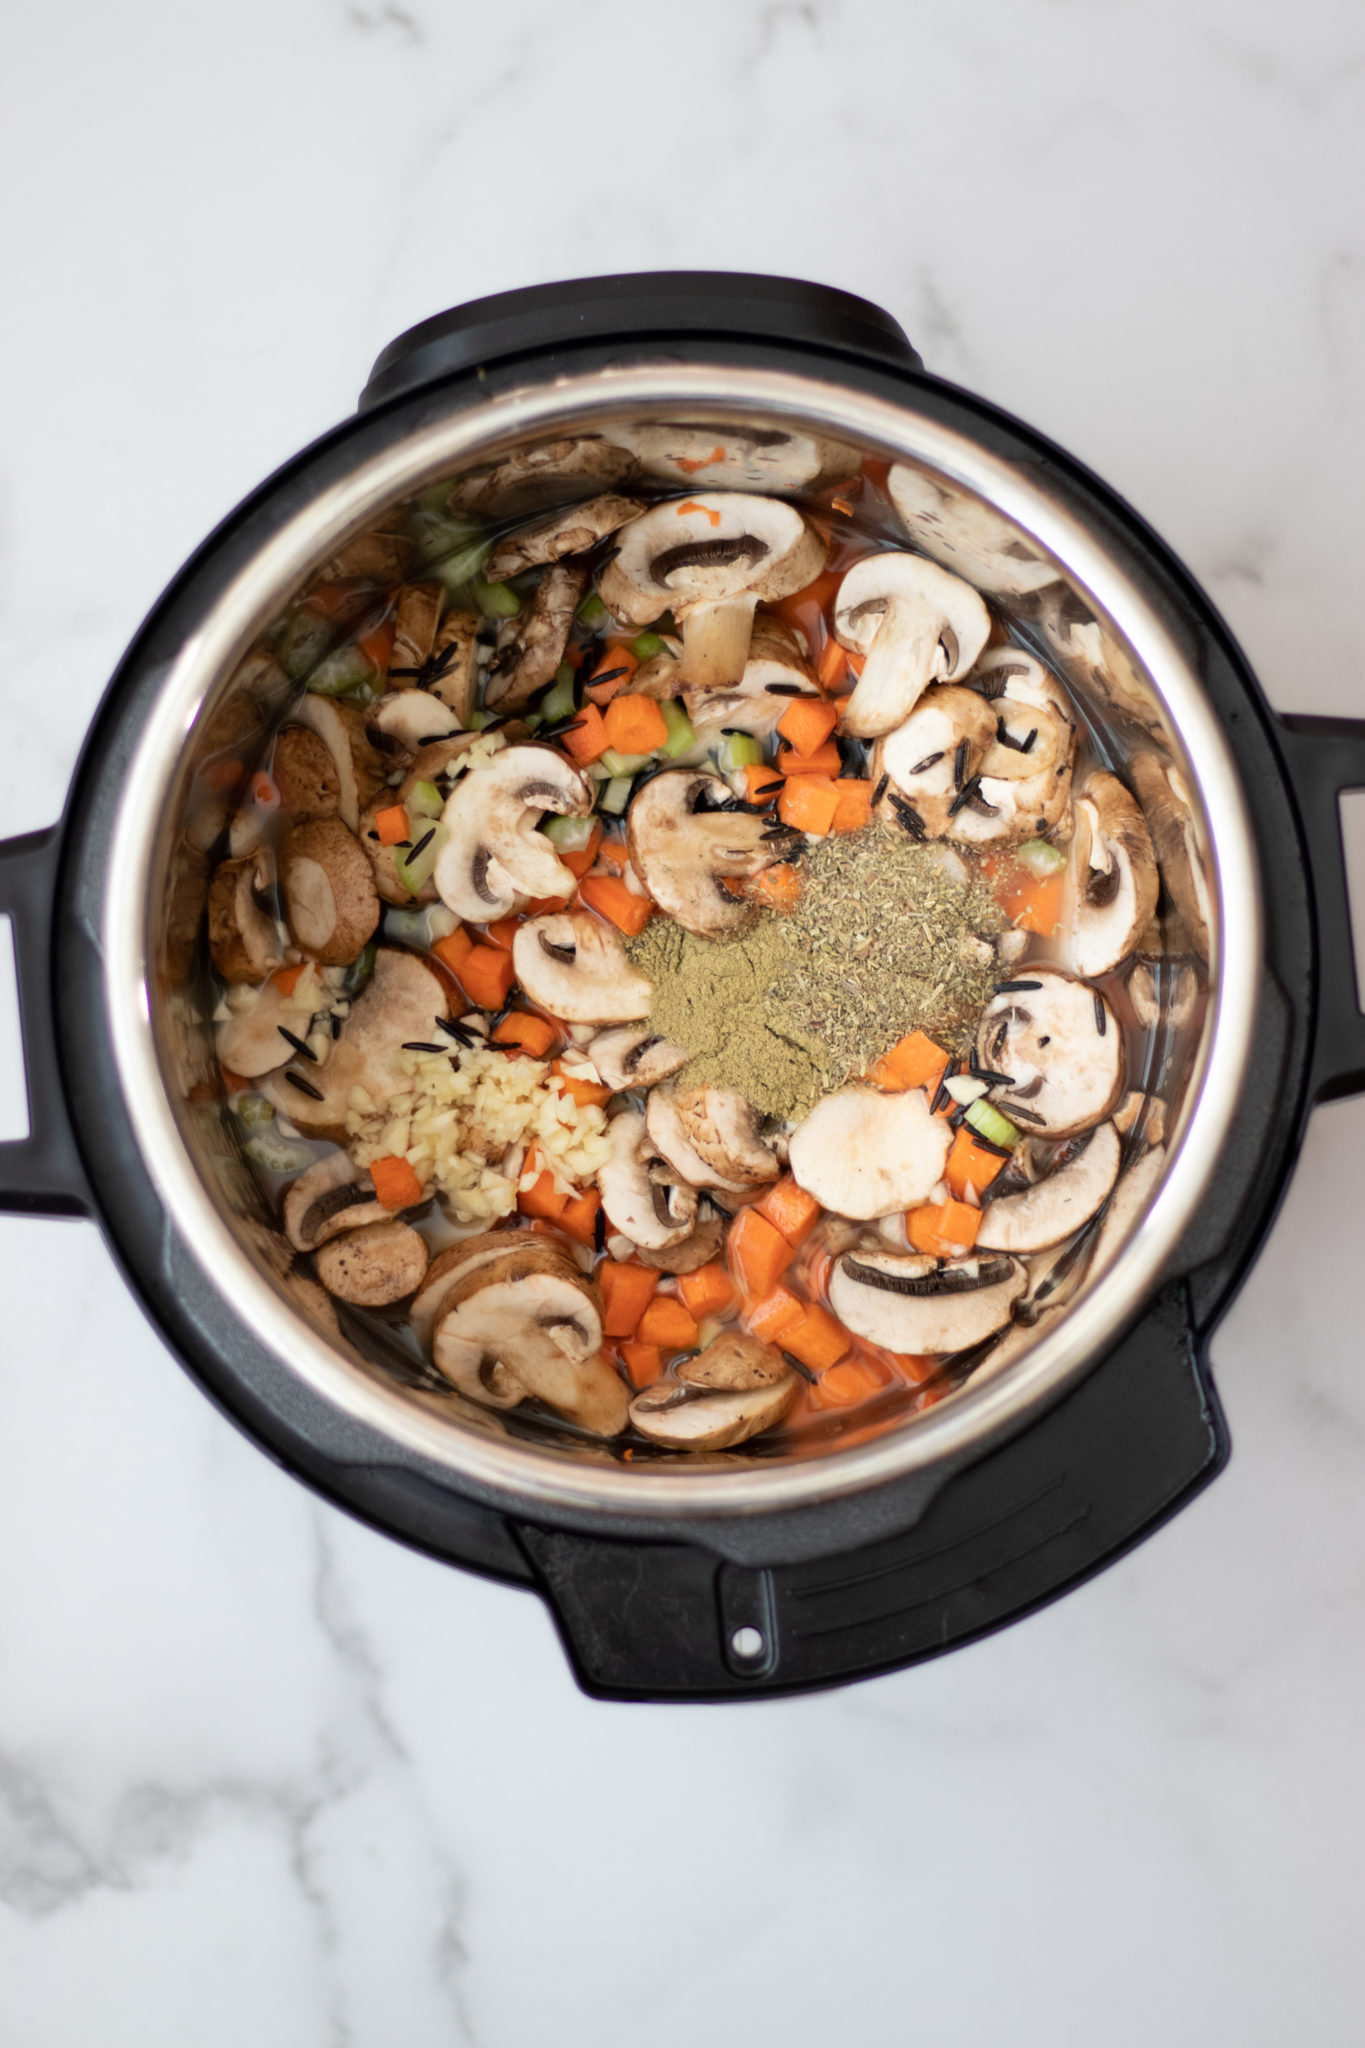 Instant Pot Mushroom Wild Rice Soup - The Grove Bend Kitchen